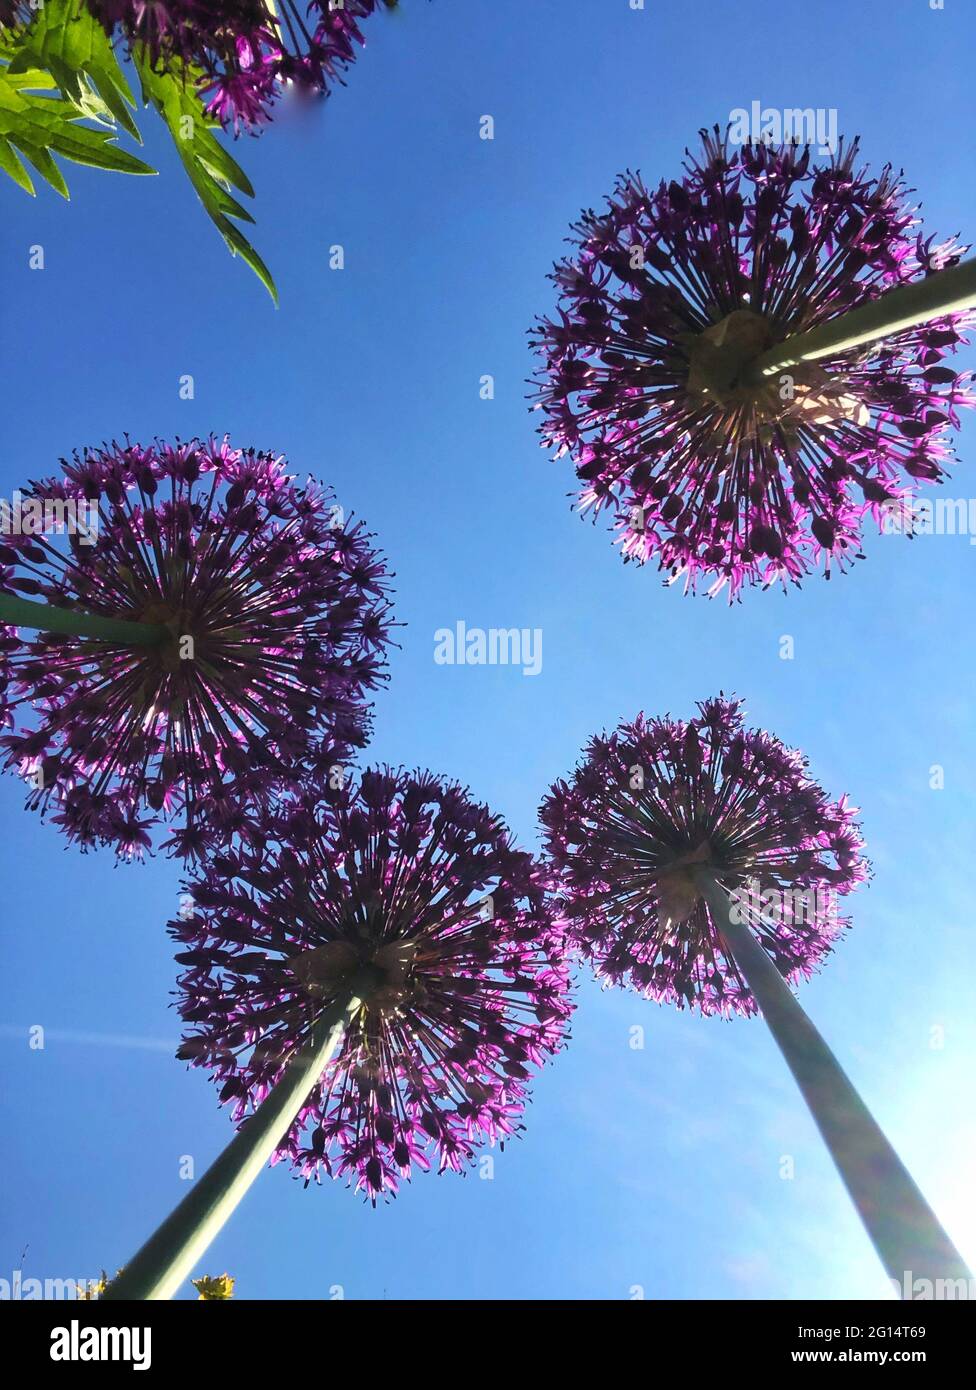 Low angle view looking up to the round heads of allium flowers waving in the wind under a bright blue sky with copy space Stock Photo